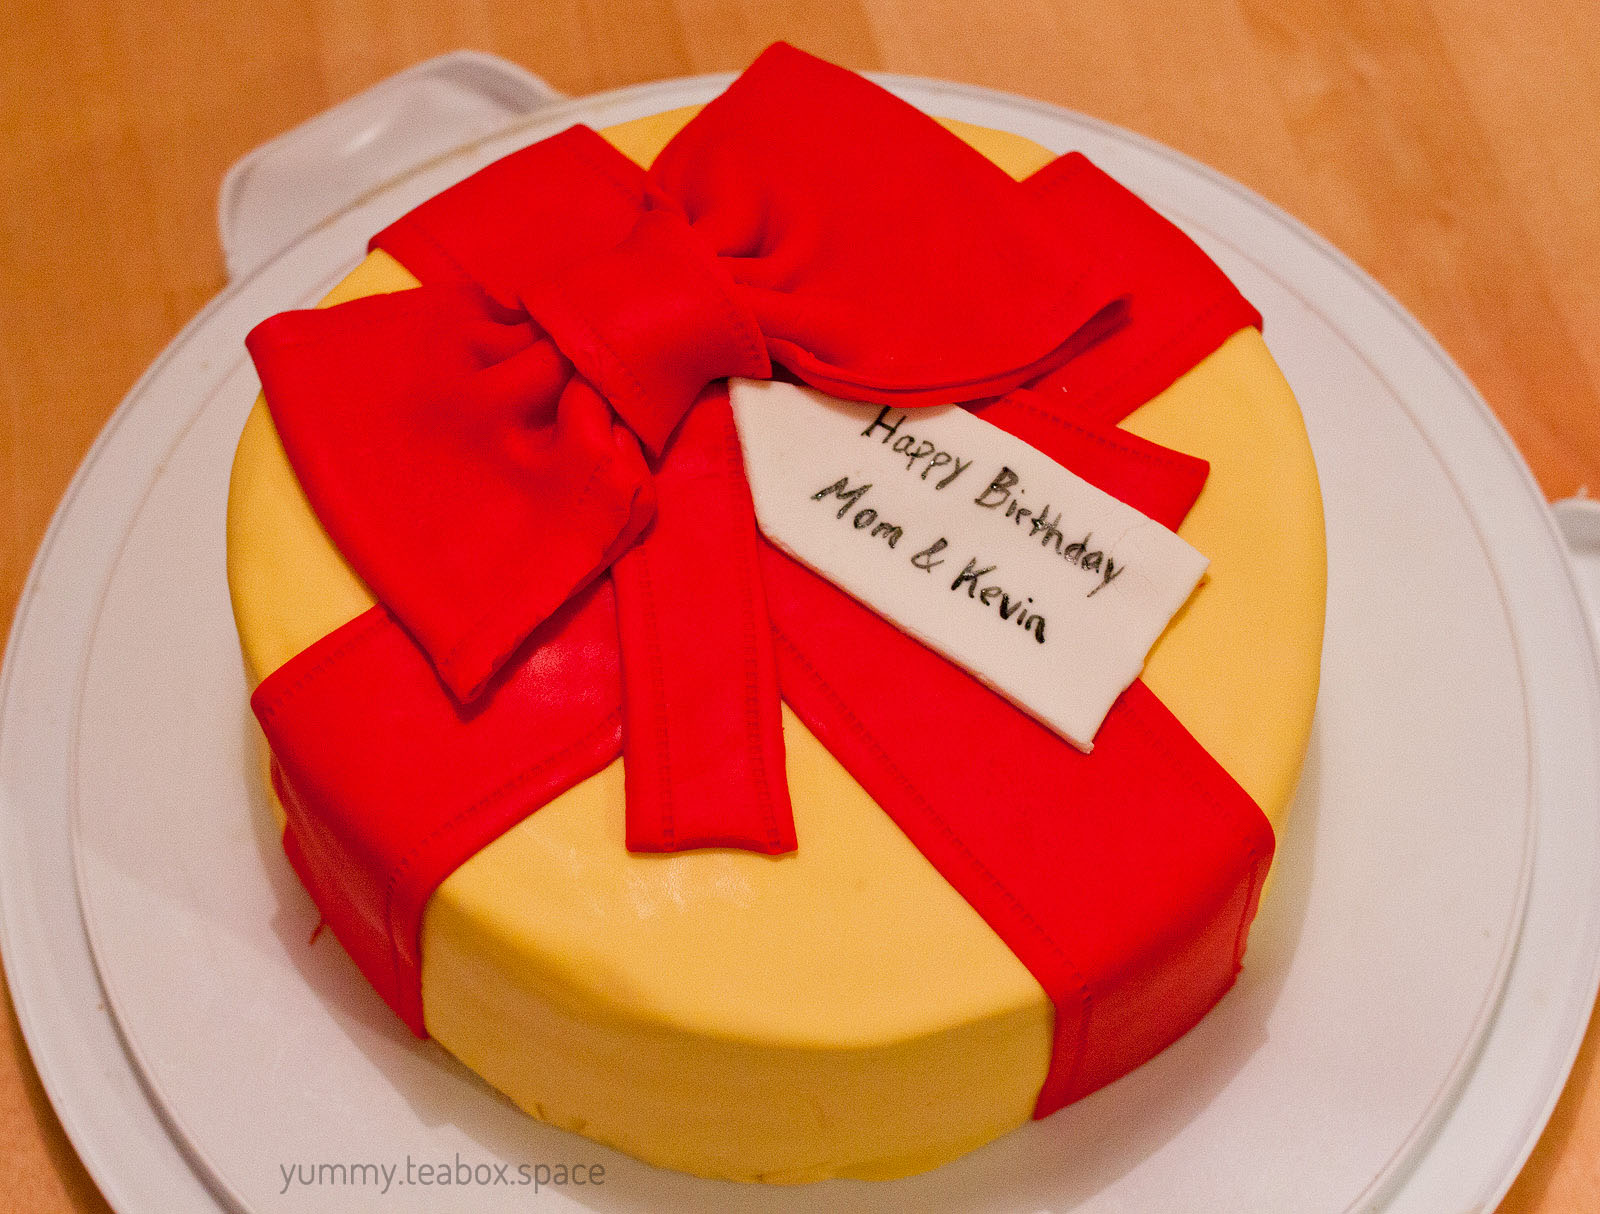 A round cake that looks like a yellow present with red ribbon, a red bow, and a gift tag that says "Happy Birthday Mom & Kevin"